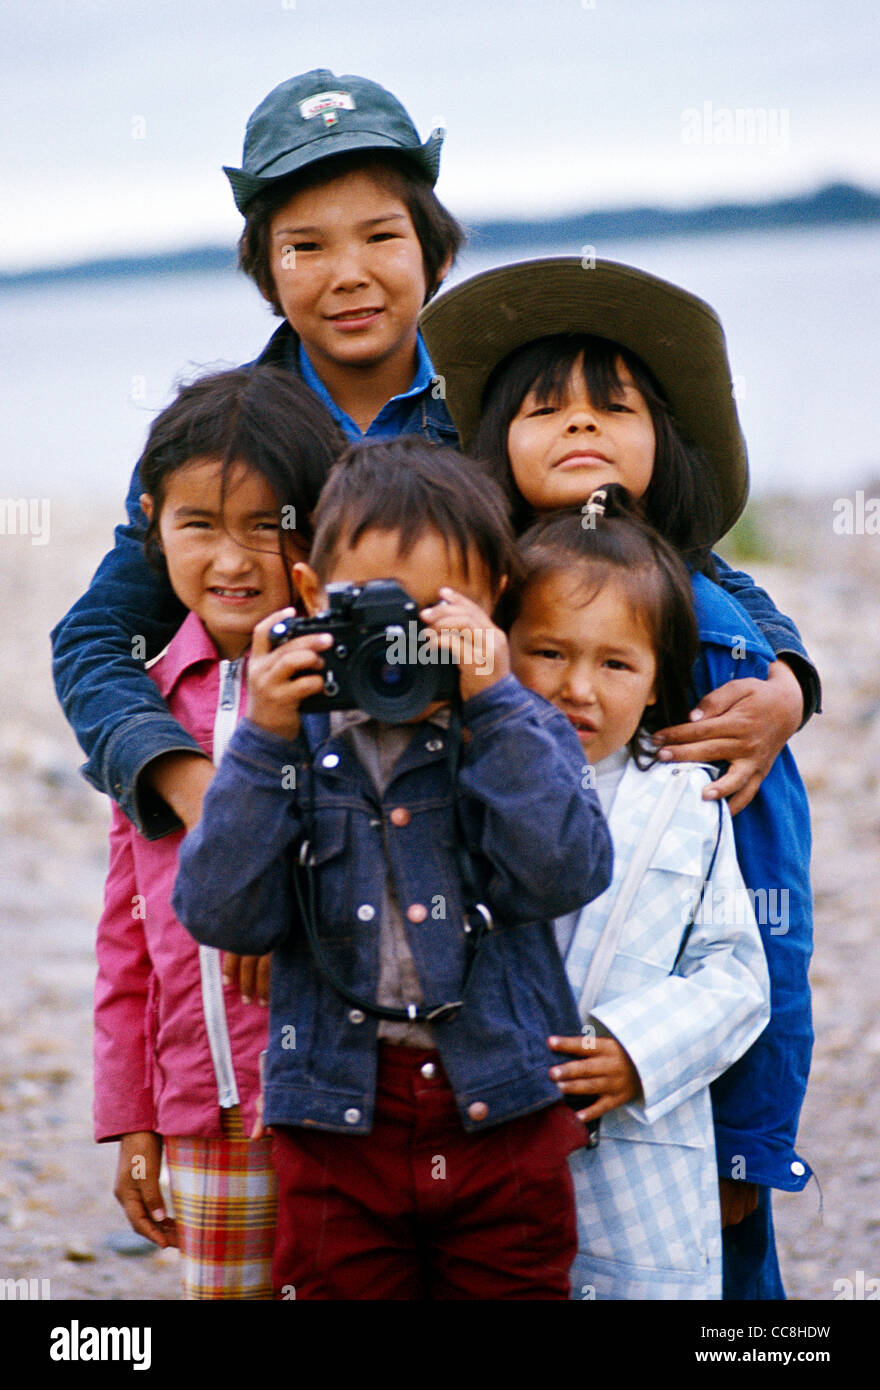 First Nation Aboriginal Children in Fort Severn,Northern Ontario;Ontario;Canada; standing with camera portrait Stock Photo